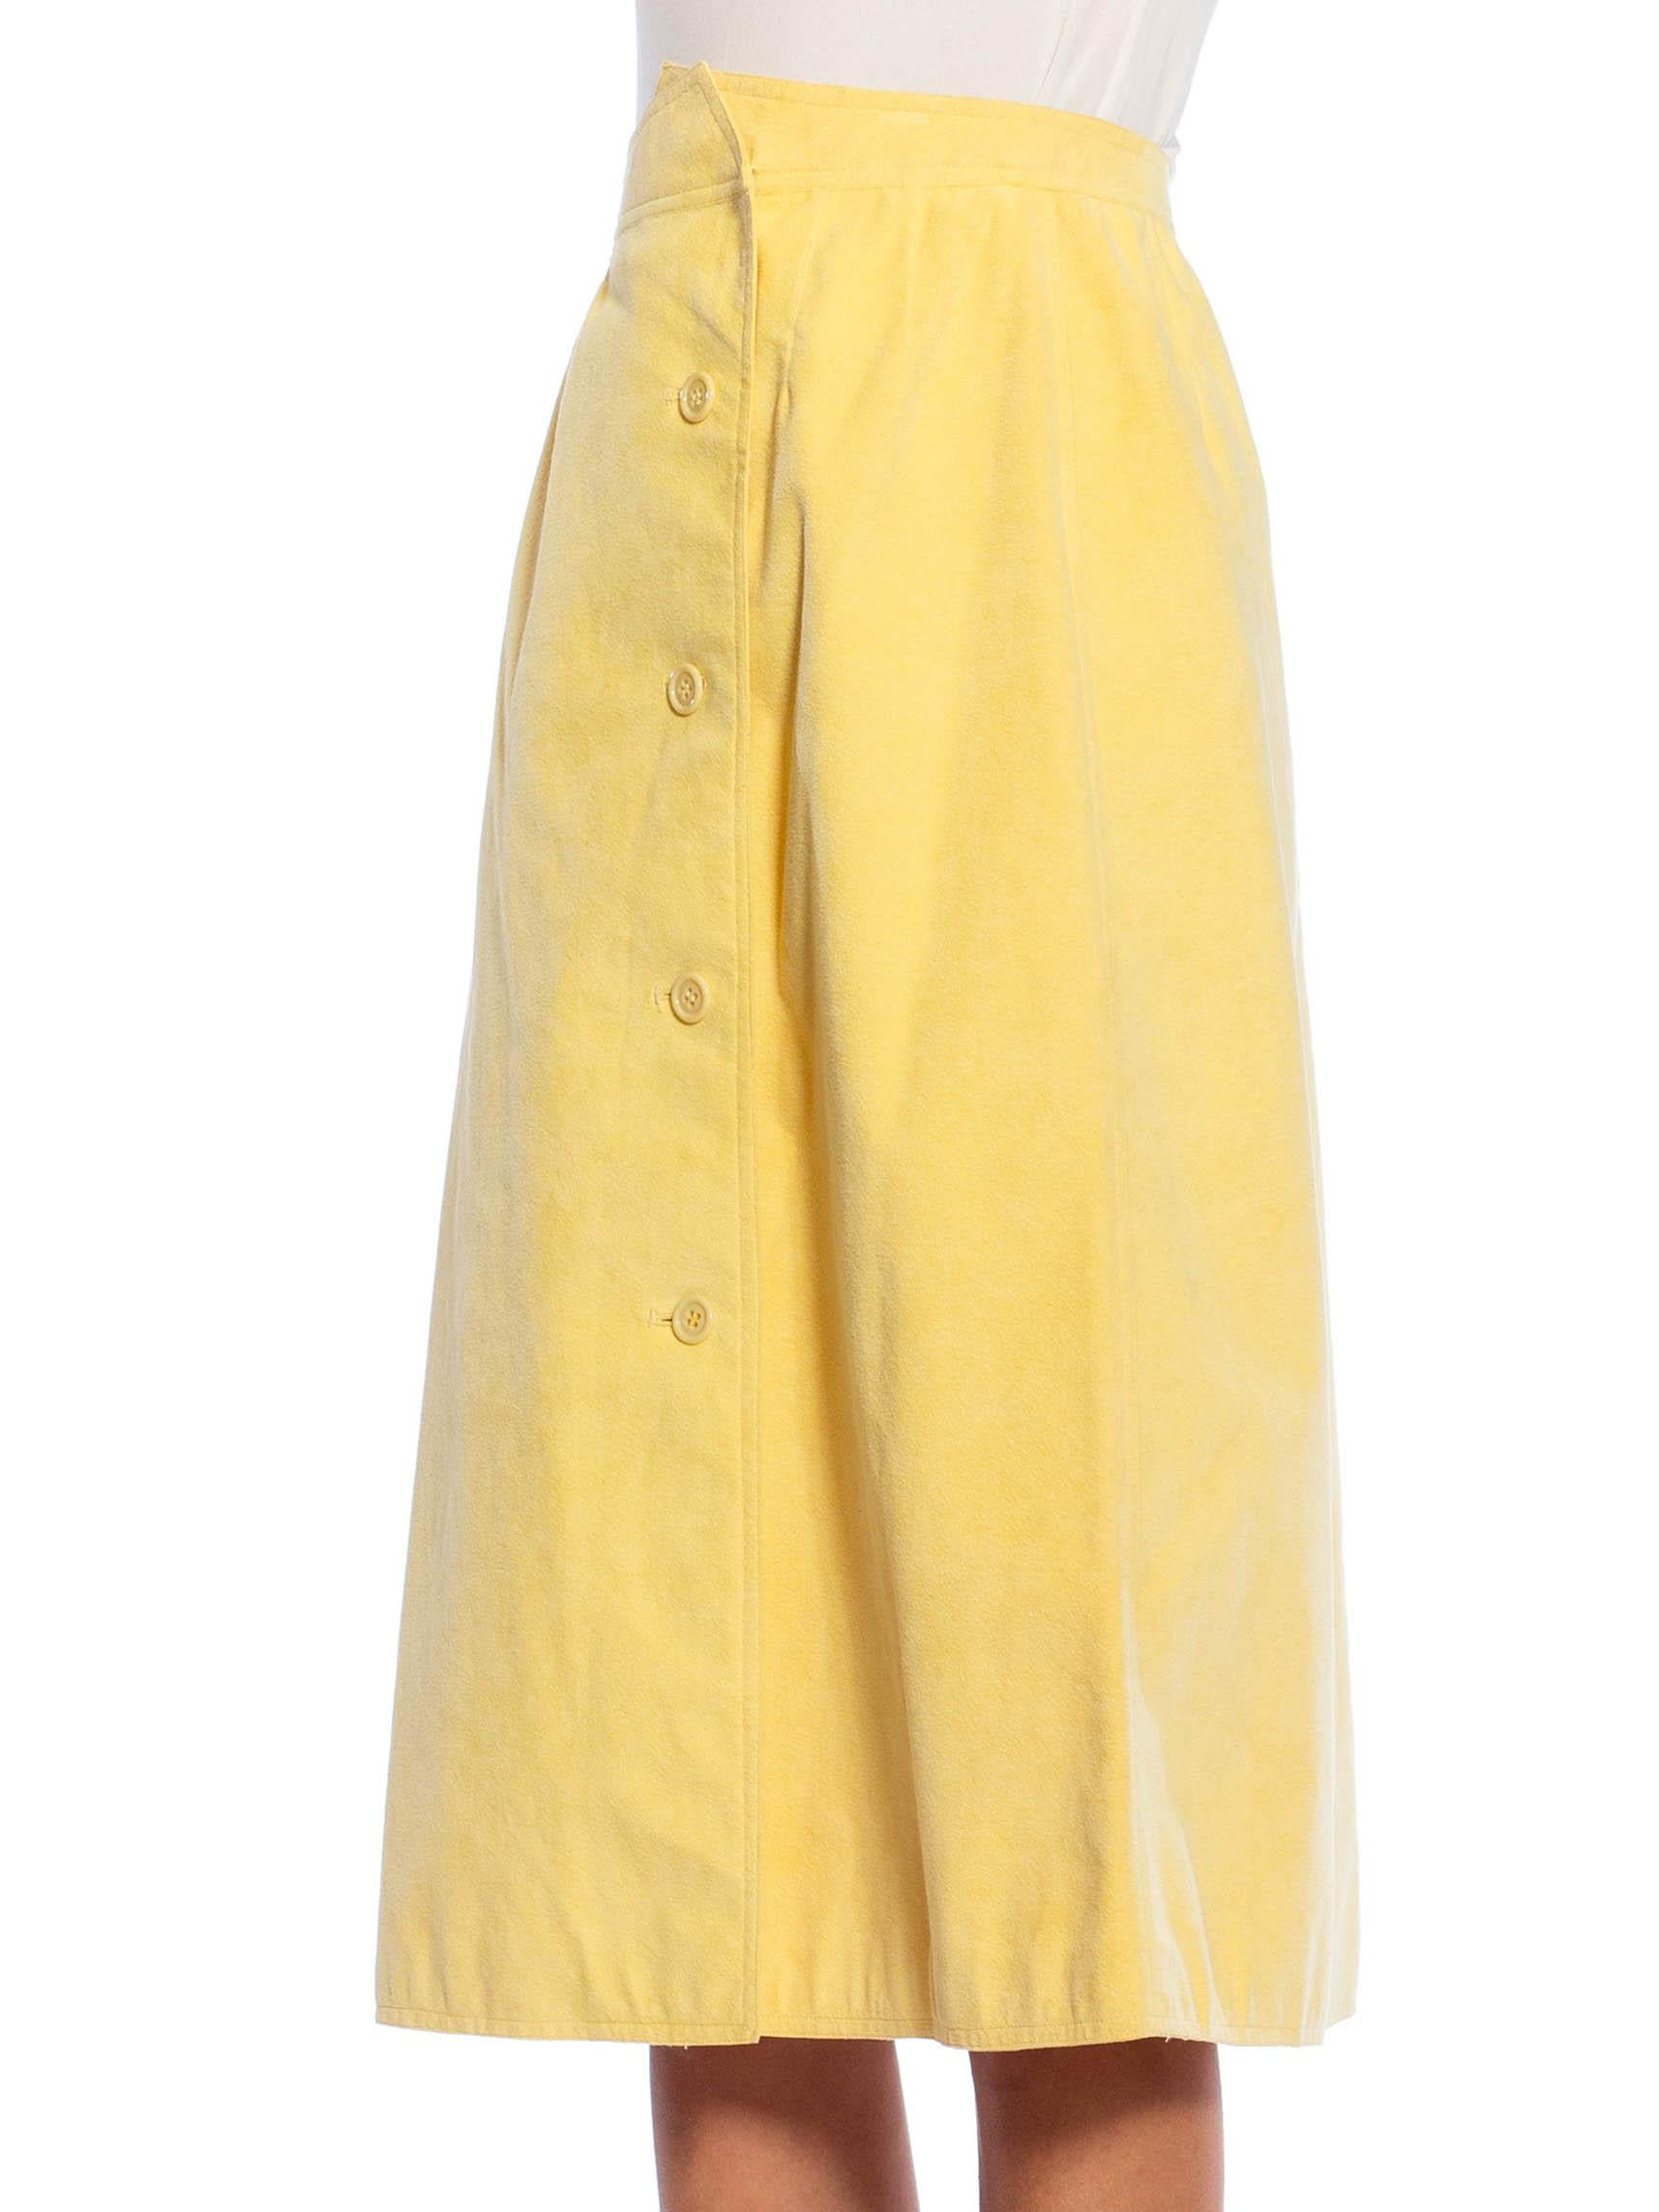 1970S HALSTON Butter Yellow Poly Blend Ultrasuede Skirt With Pockets 2